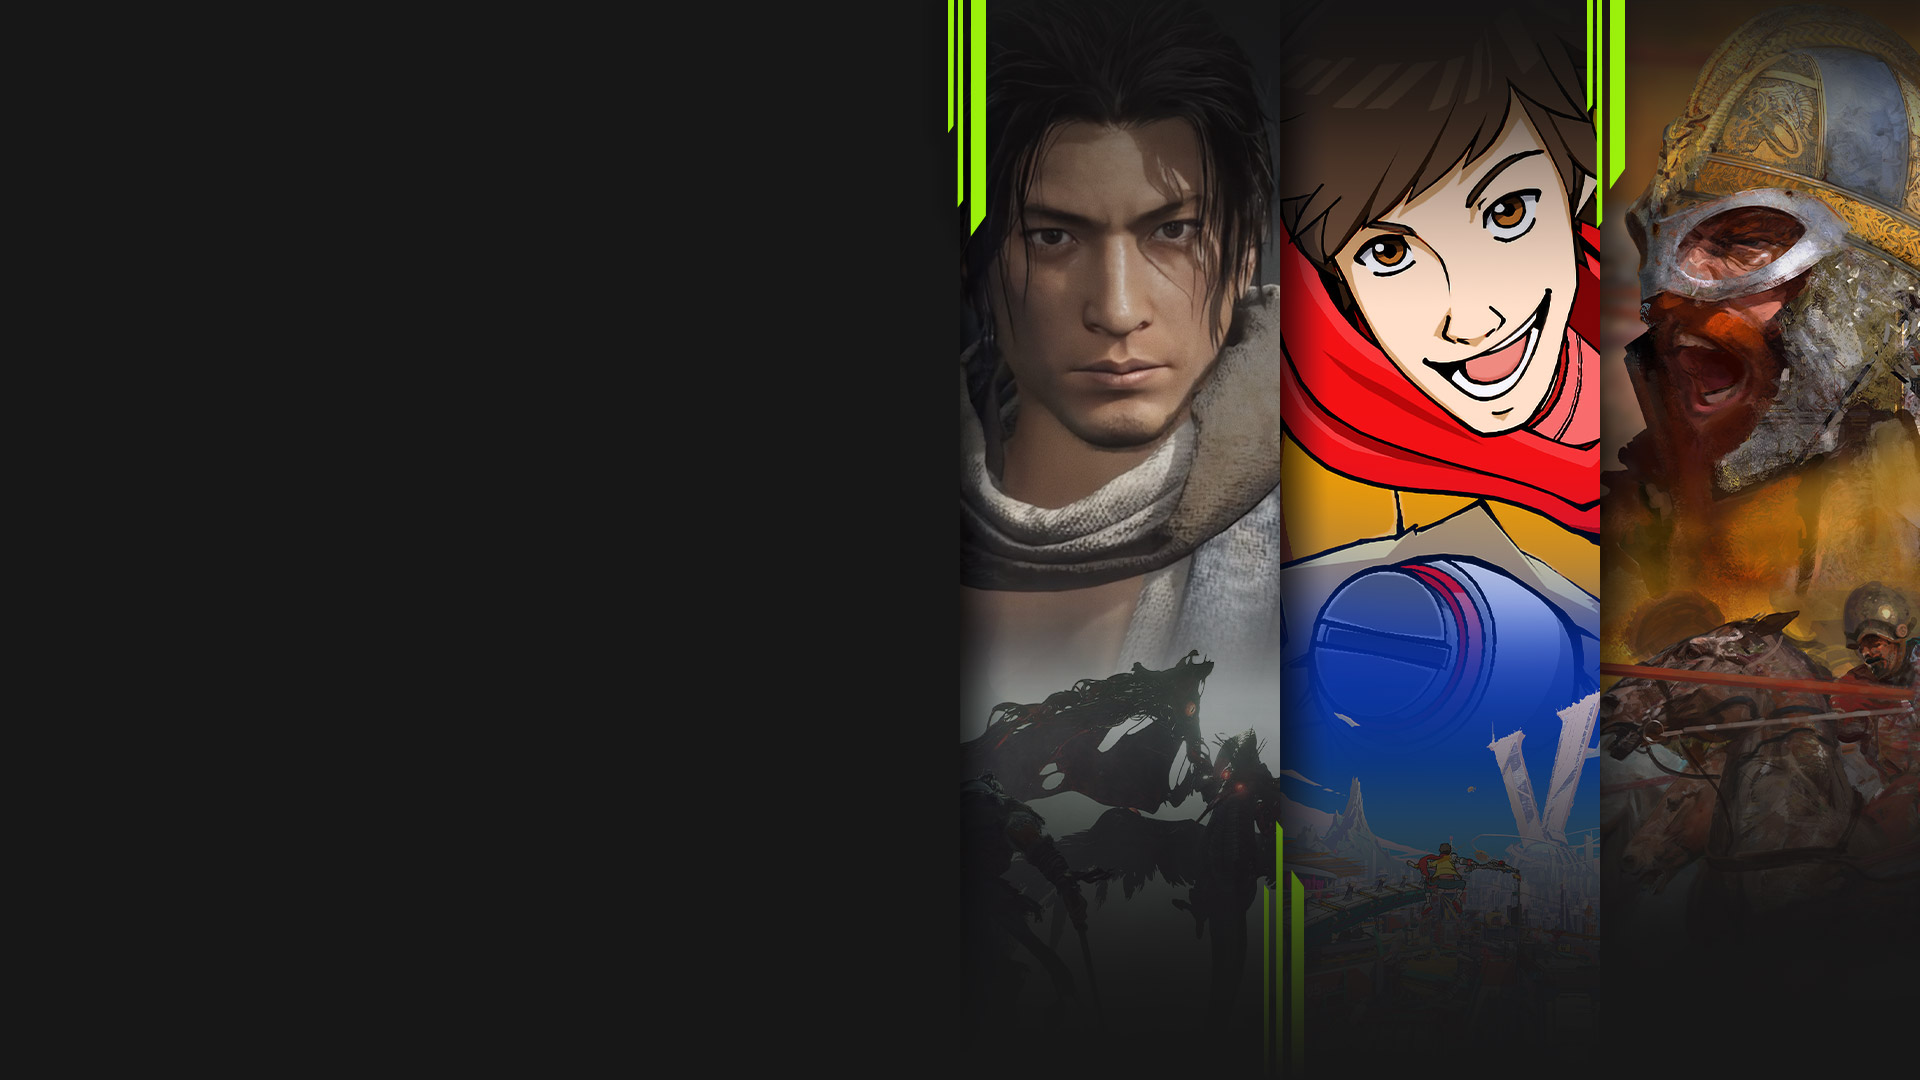 Game art from multiple games available now with Xbox Game Pass, including Wo Long: Fallen Dynasty, Hi-Fi Rush, Age of Empires II: Definitive Edition and Disney Dreamlight Valley.